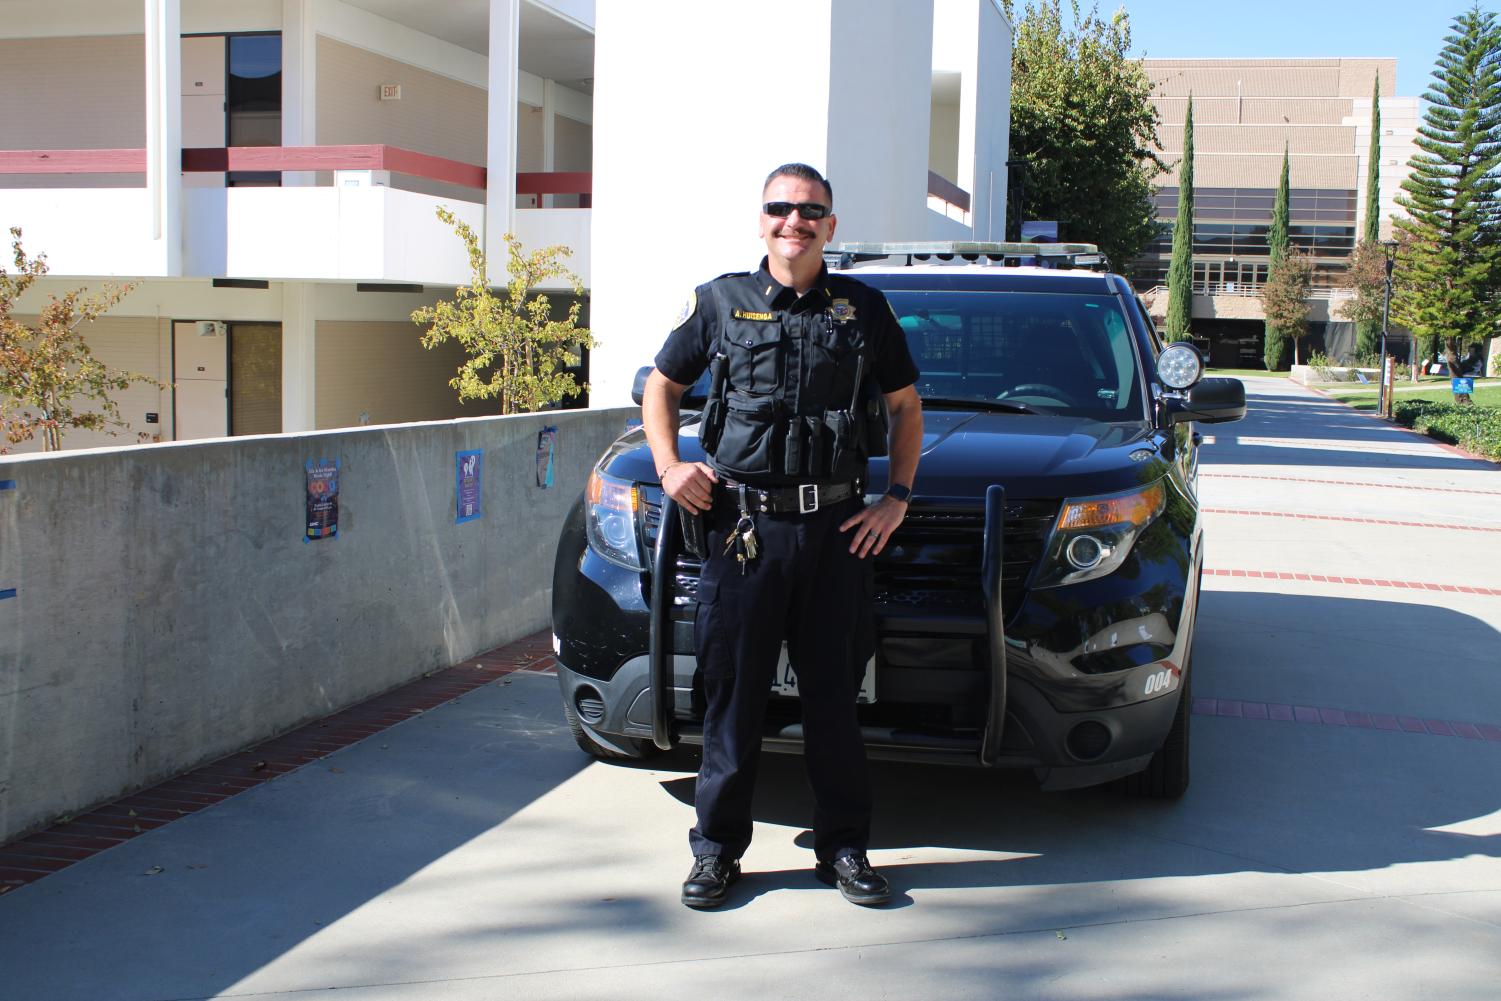 Lieutenant Andrew Huisenga poses in front of a Police car on the main campus of Moorpark College on Nov. 15. IDK what to say for a second sentence help me out here.